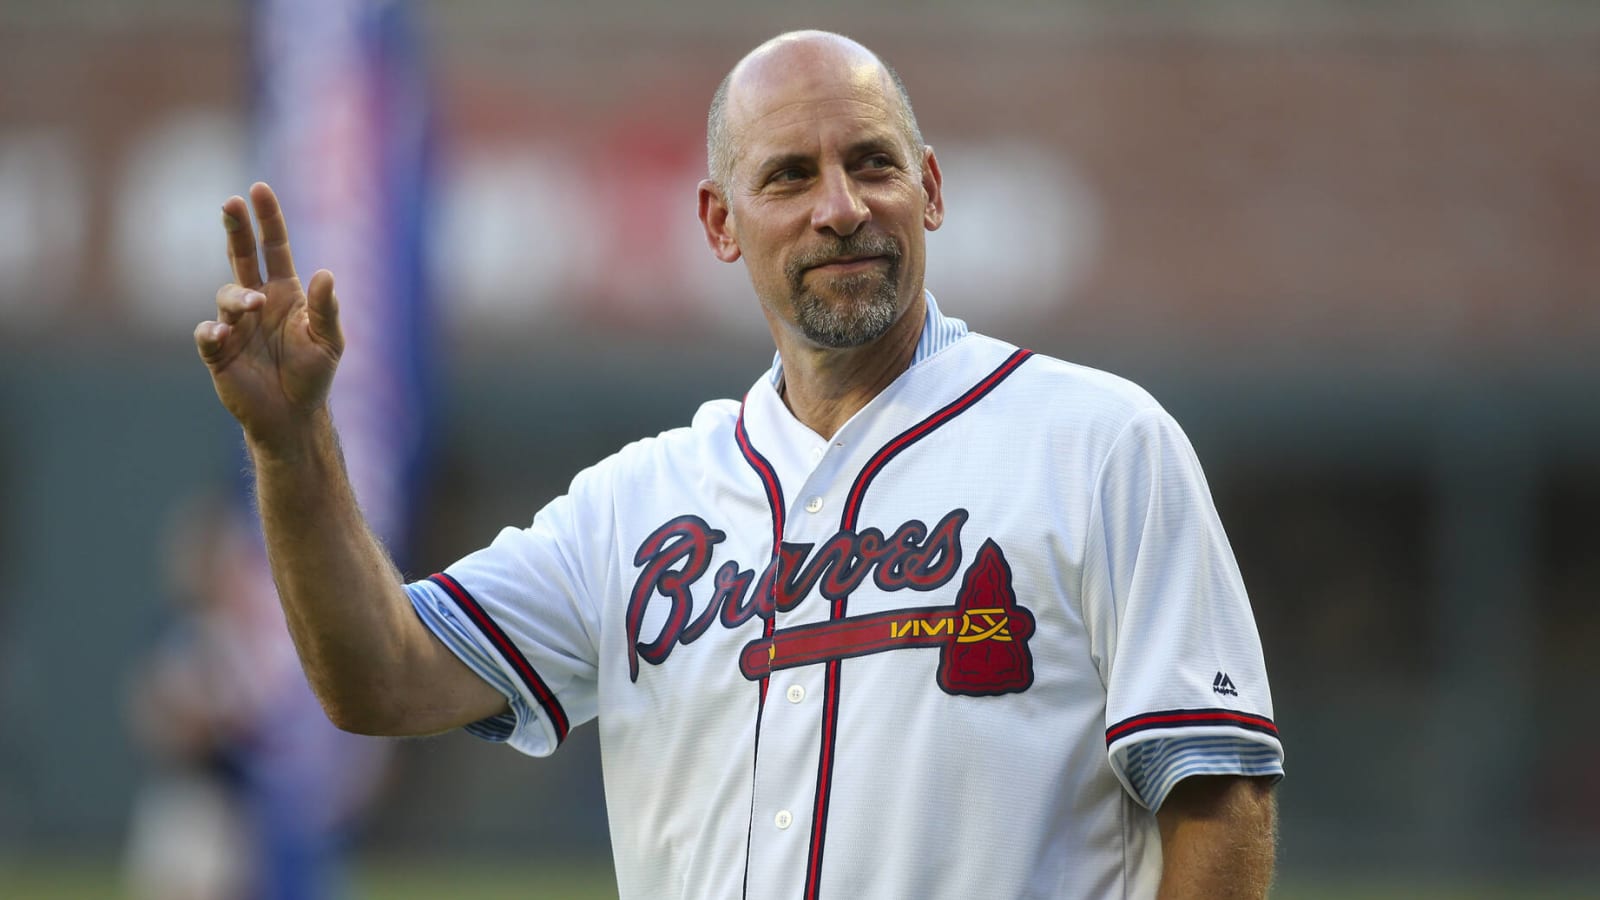 Braves remind HOF franchise icon of 1984 WS champions